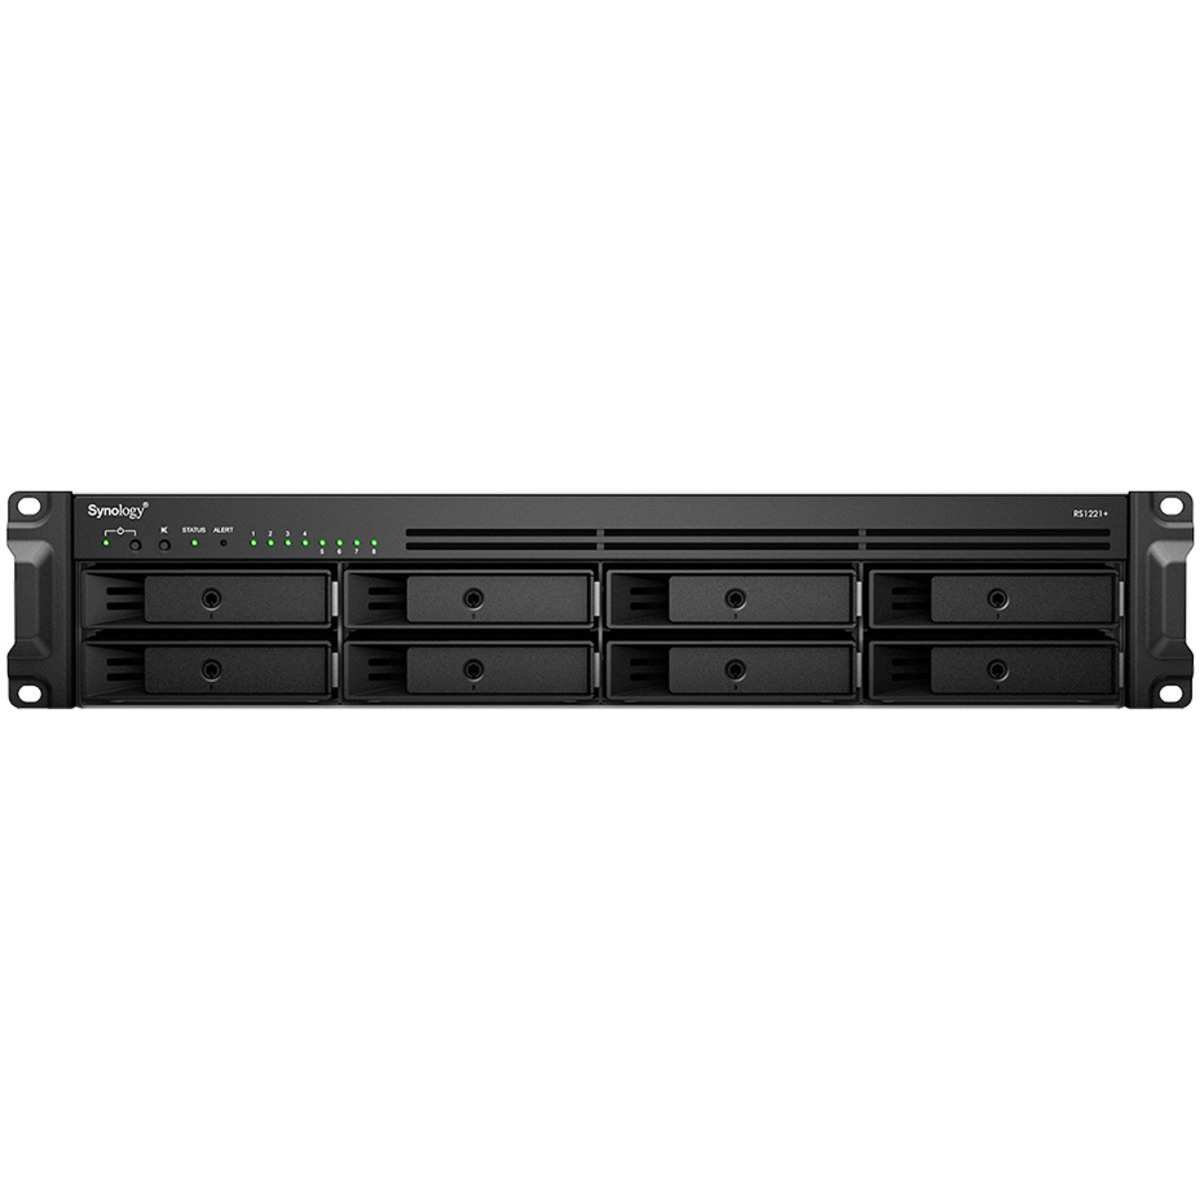 buy $3702 Synology RackStation RS1221+ 16tb RackMount NAS - Network Attached Storage Device 8x2000gb Western Digital Red SA500 WDS200T1R0A 2.5 SATA 6Gb/s SSD NAS Class Drives Installed - Burn-In Tested - nas headquarters buy network attached storage server device das new raid-5 free shipping usa RackStation RS1221+